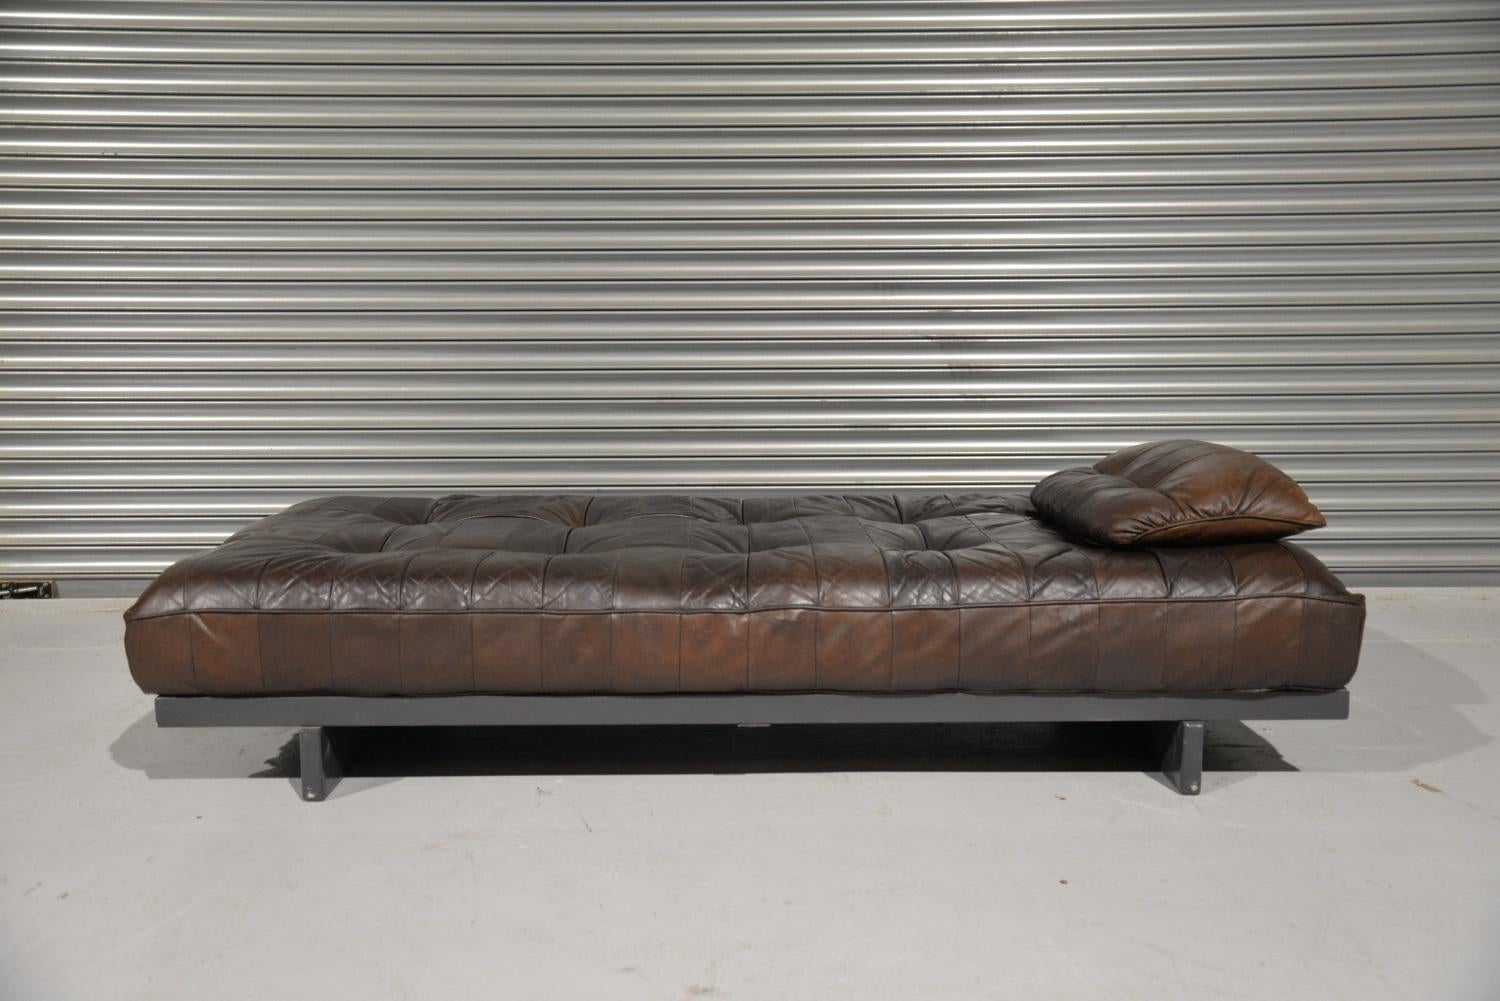 We are delighted to bring to a rare De Sede DS 80 patchwork leather daybed with patchwork cushion. Hand built in the 1960s by De Sede craftsman in Switzerland, the daybed stands on a wooden frame and is upholstered in luxurious soft patchwork brown